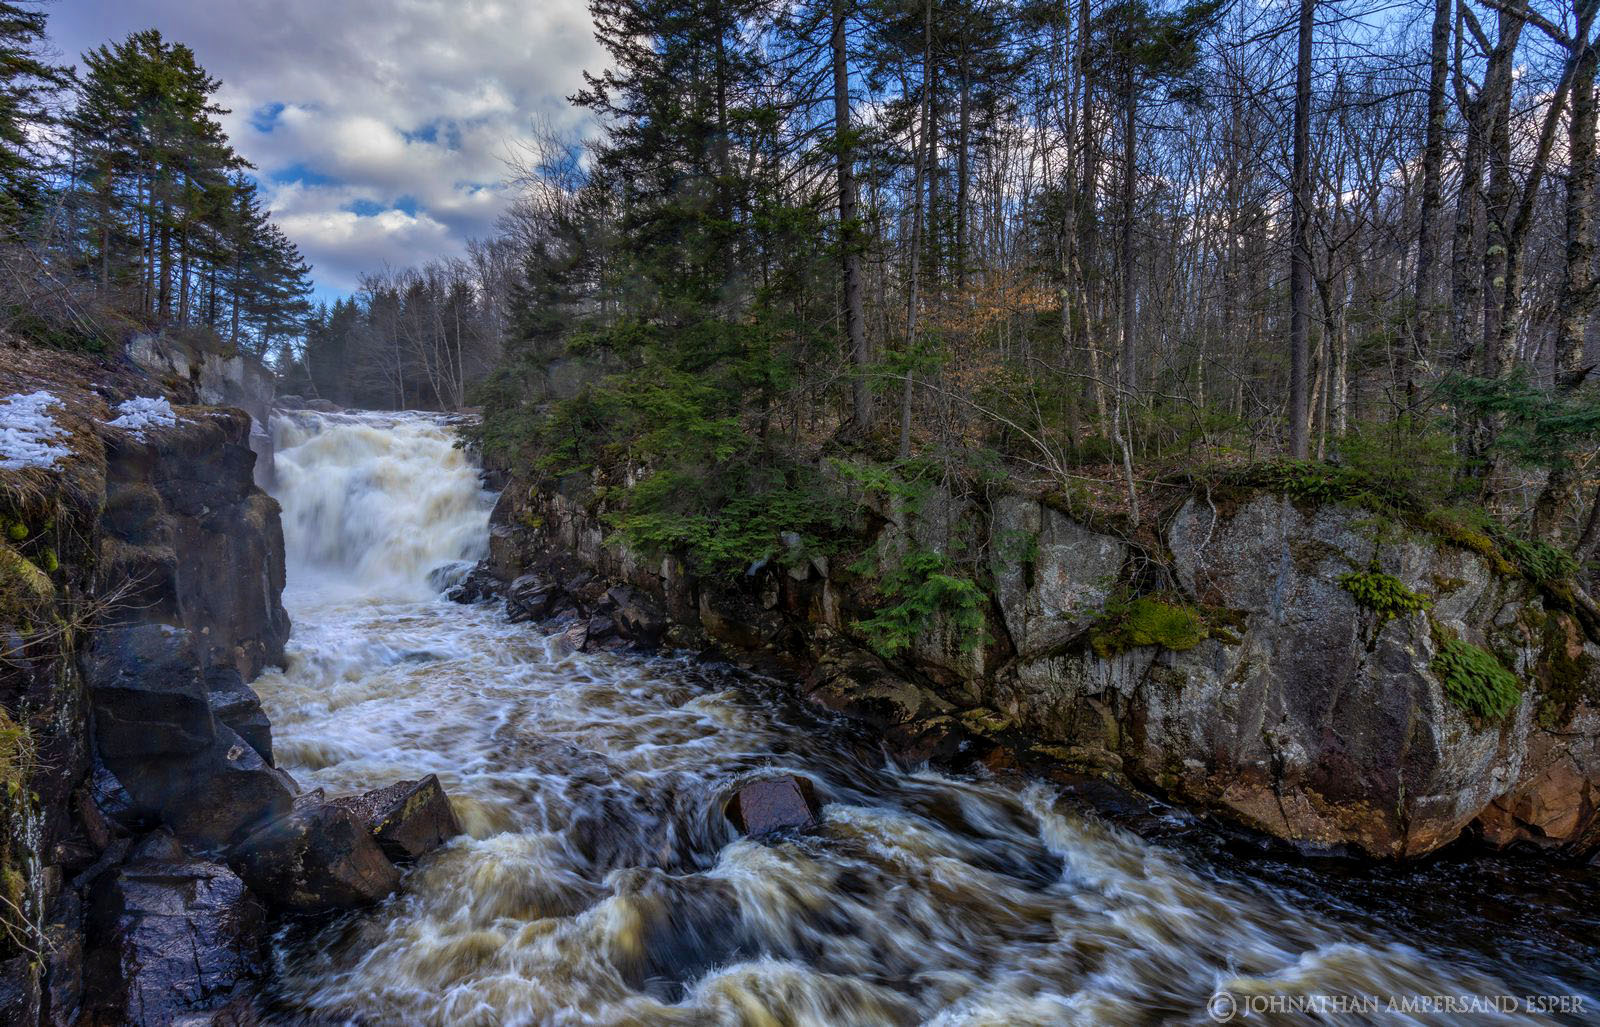 Grasse River,Grass River,Rainbow Falls,Rainbow Falls Grasse River,Tooley Pond Rd,waterfall,spring,2020,April,gorge,